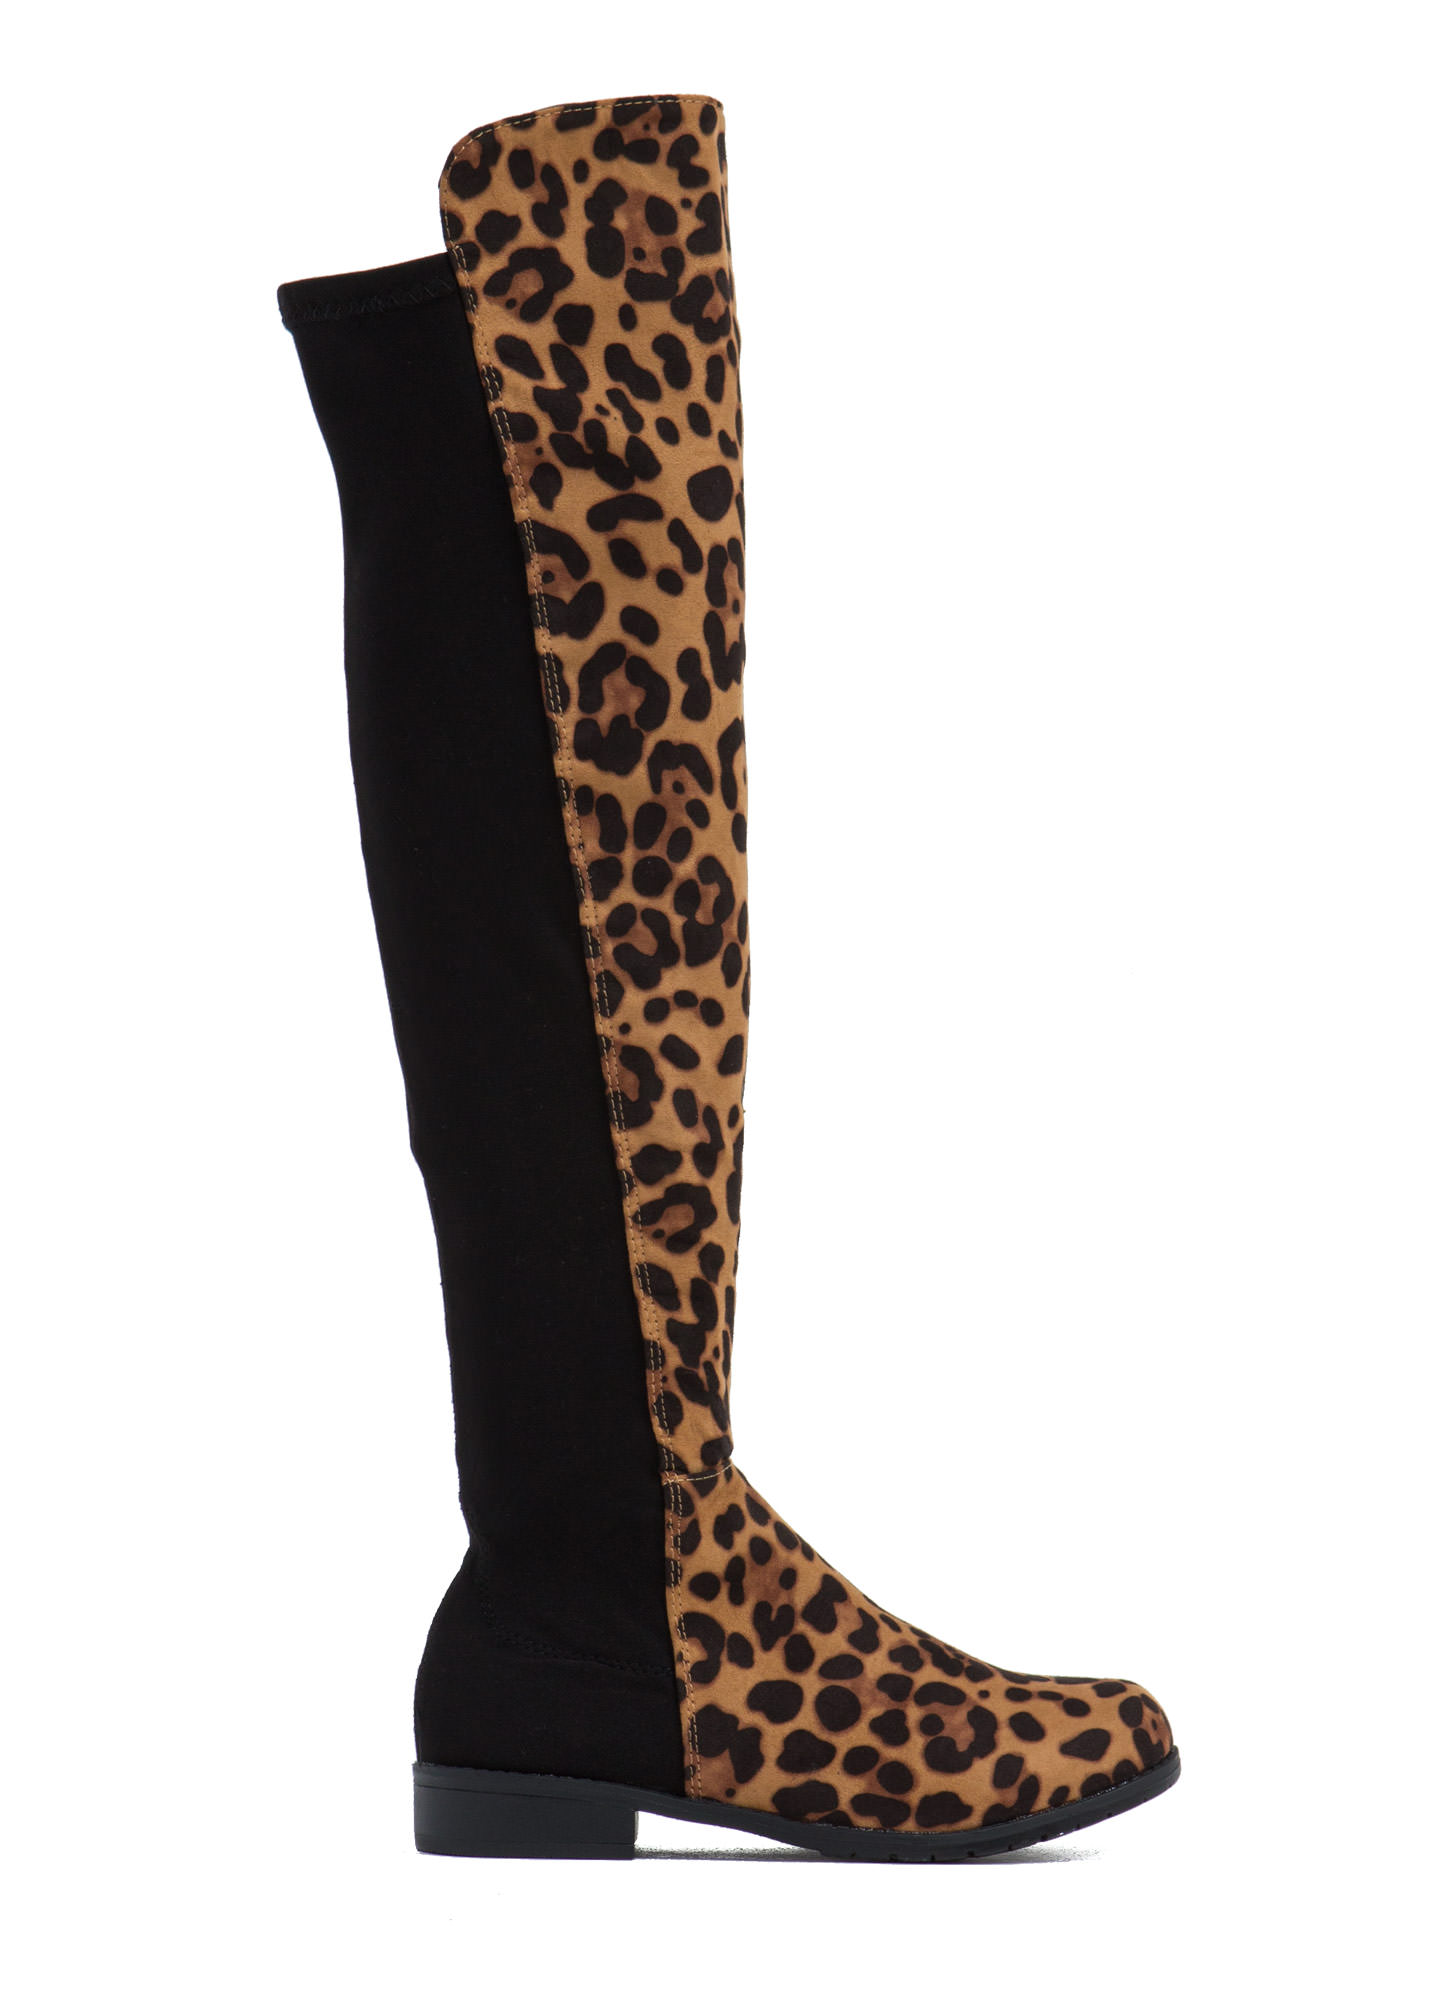 Score Slim Leopard Over-The-Knee Boots